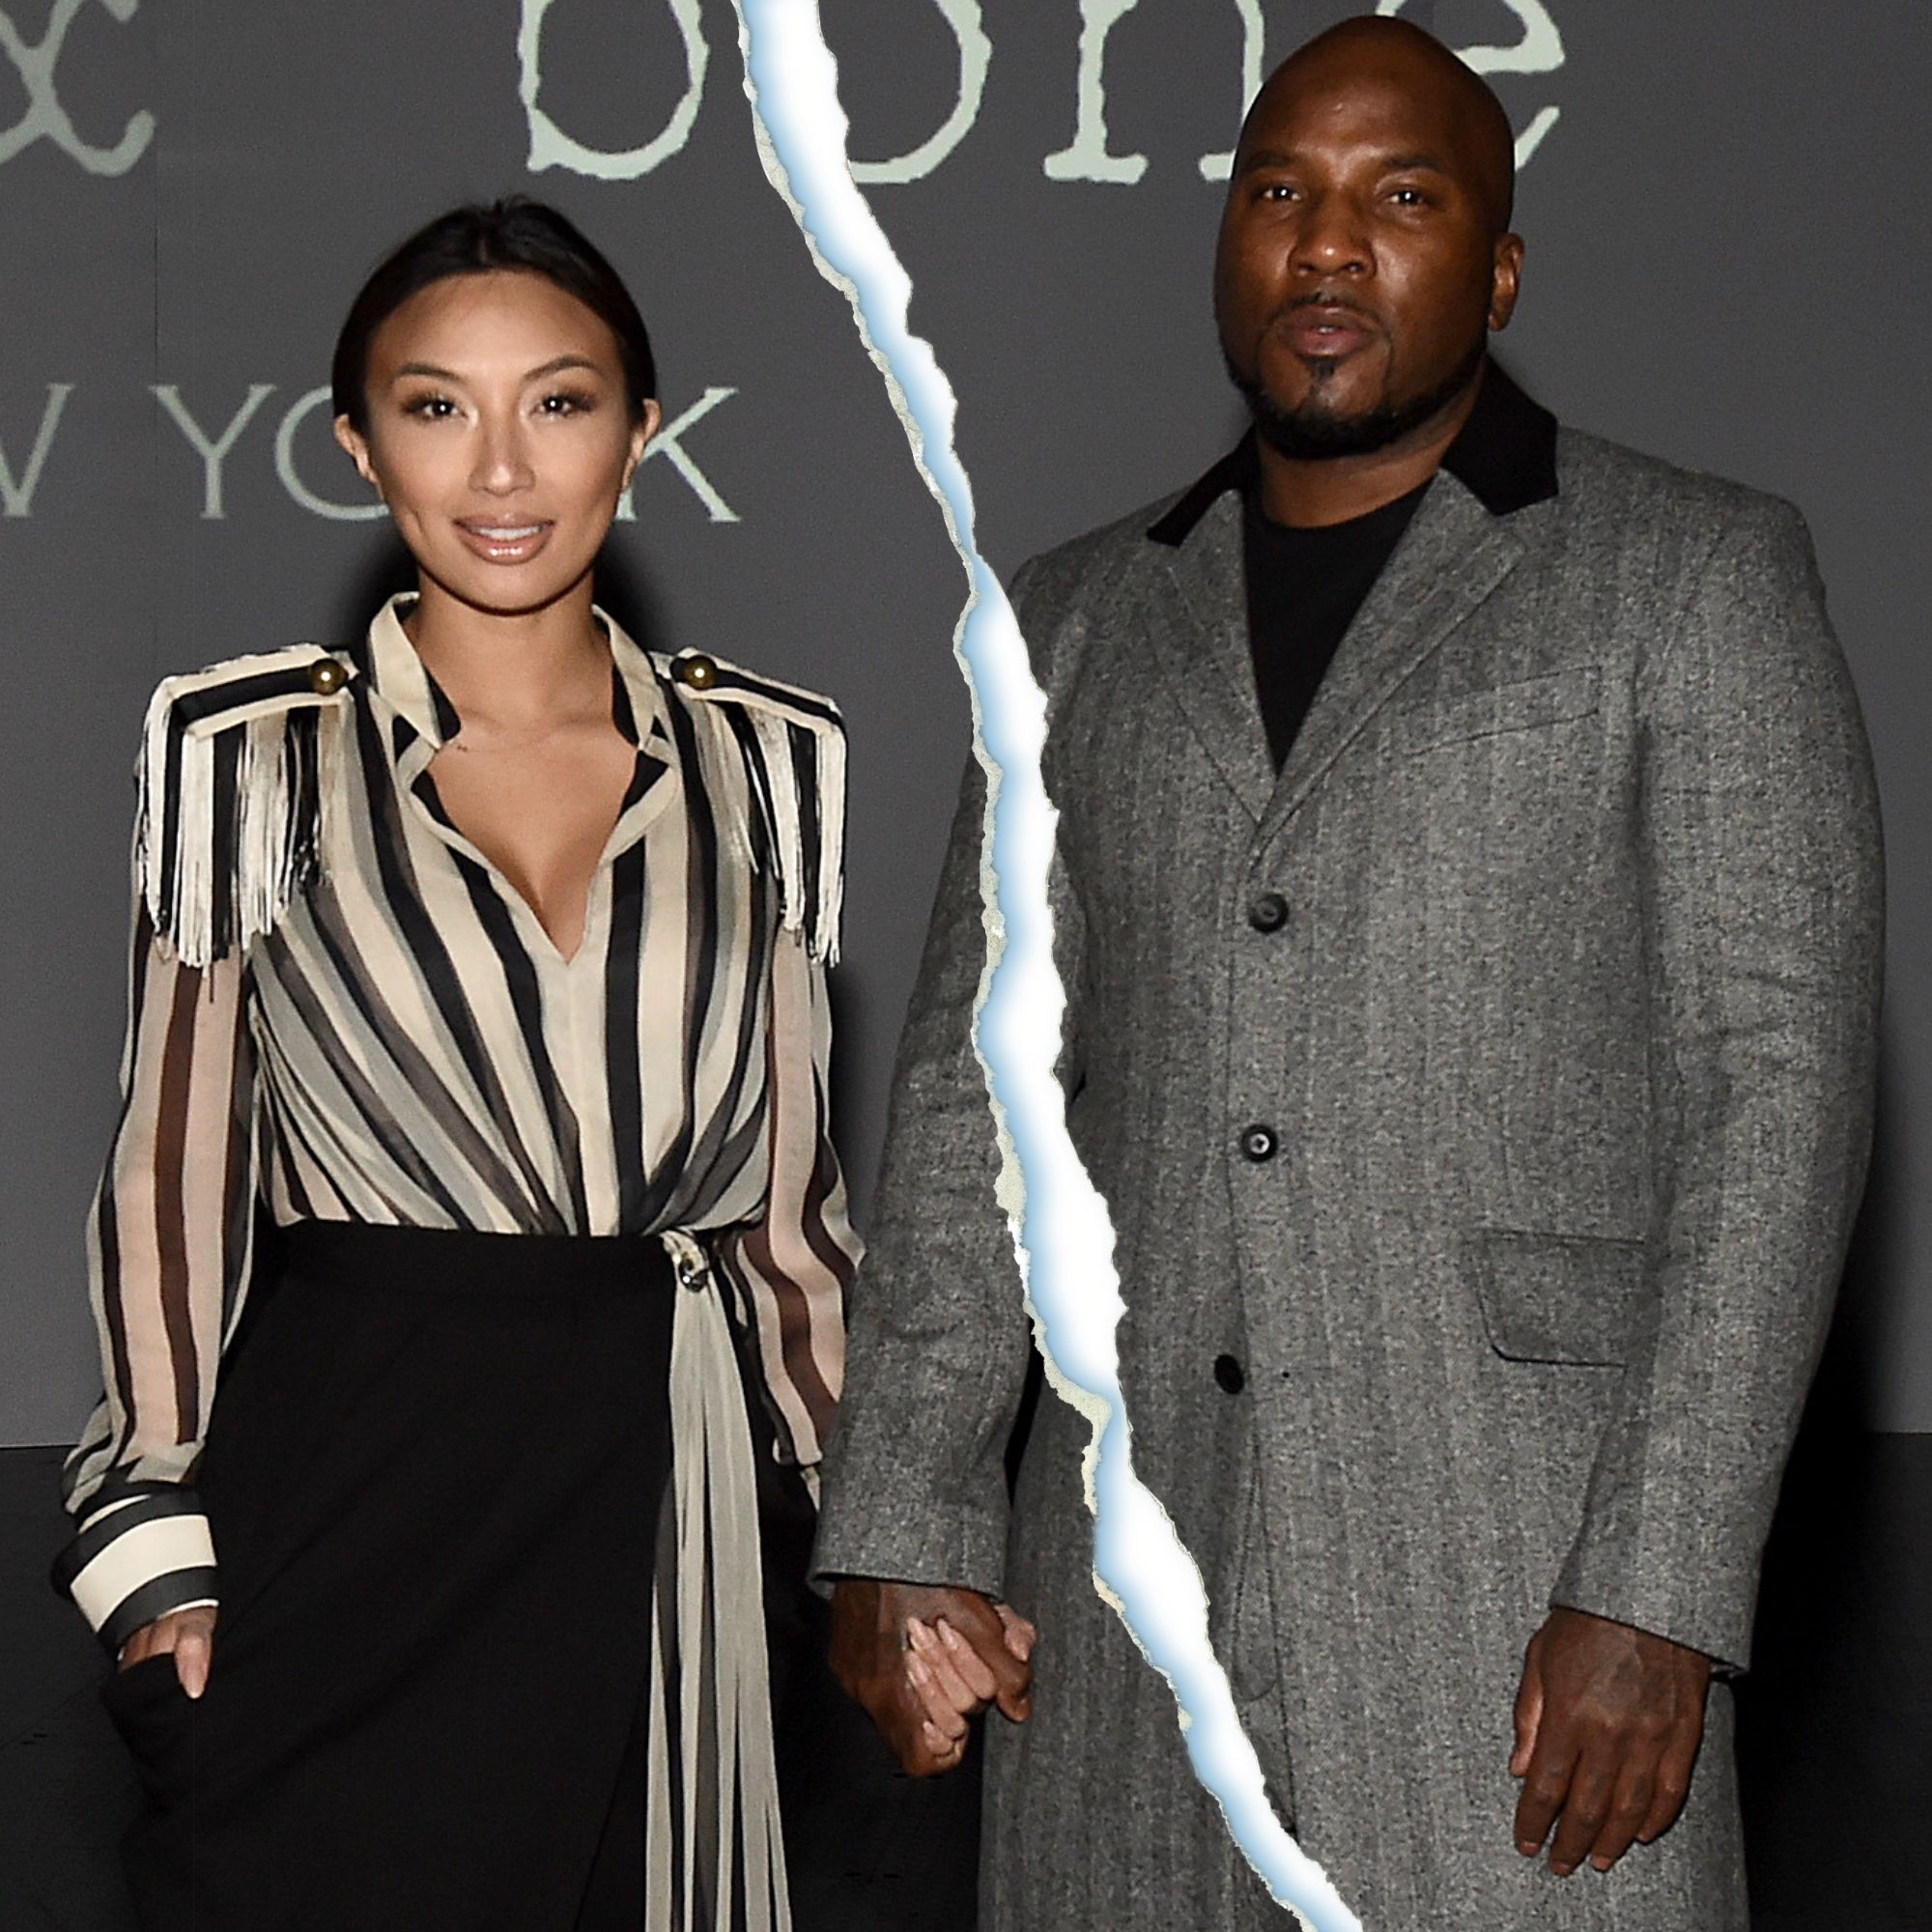 Jeannie Mai Getting a Divorce From Jeezy After 2 Years | Life & Style